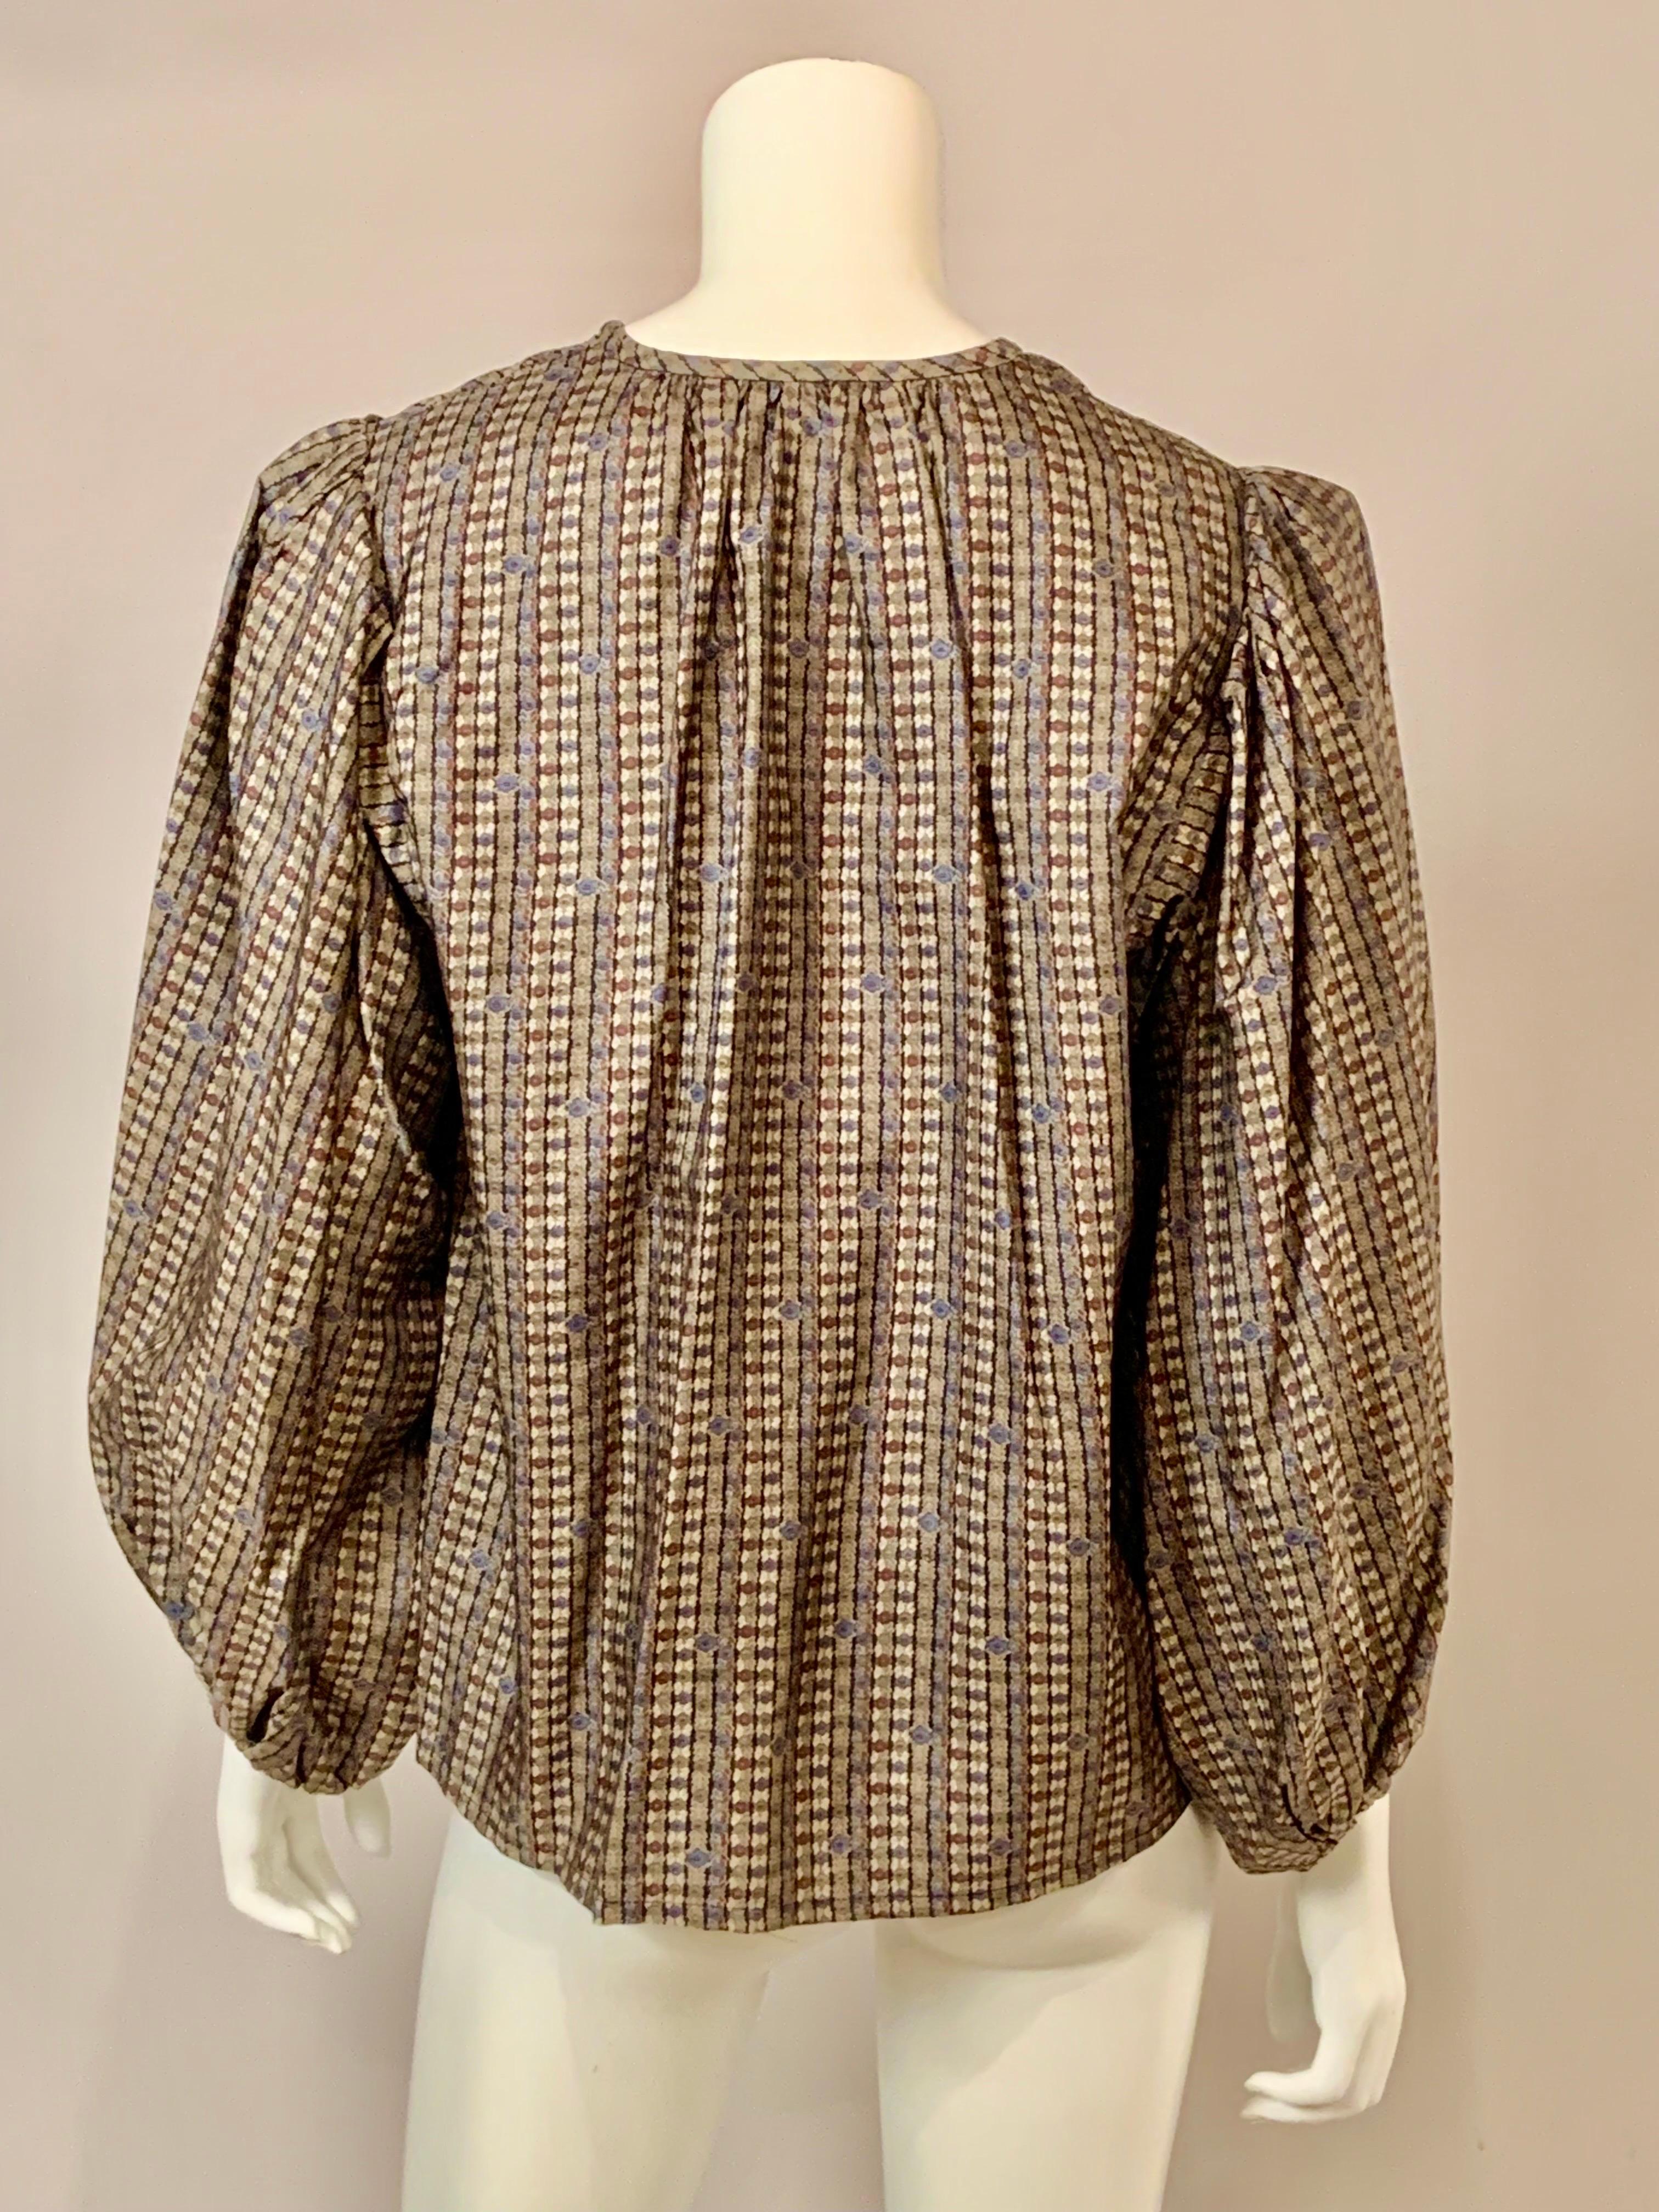 Yves Saint Laurent Printed Peasant Style Silk Blouse For Sale 1